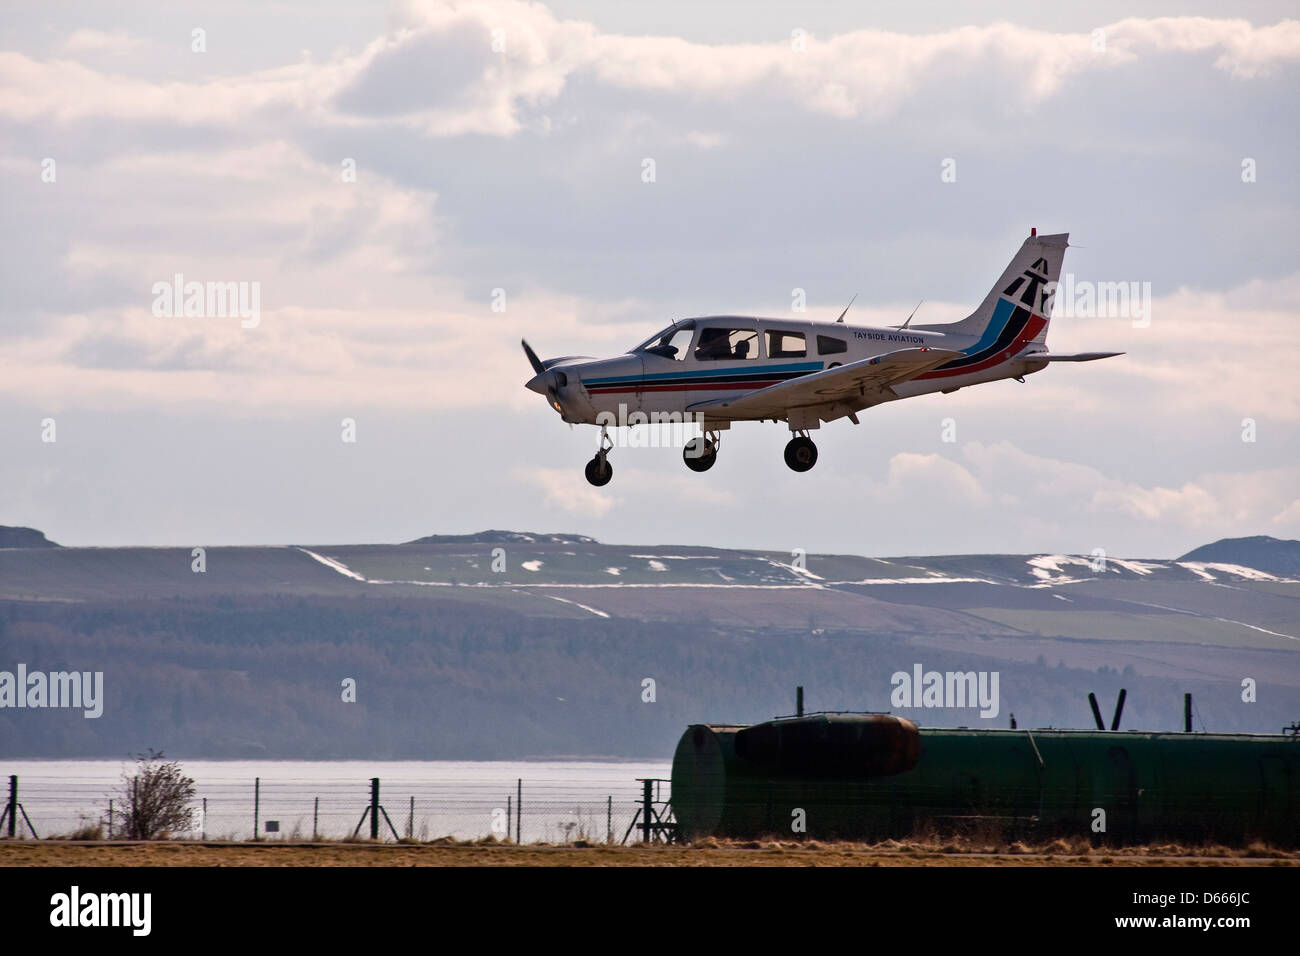 Tayside Aviation Piper PA-28 Warrior G-BIIT aircraft approaching the runway to land at Dundee Airport,UK Stock Photo